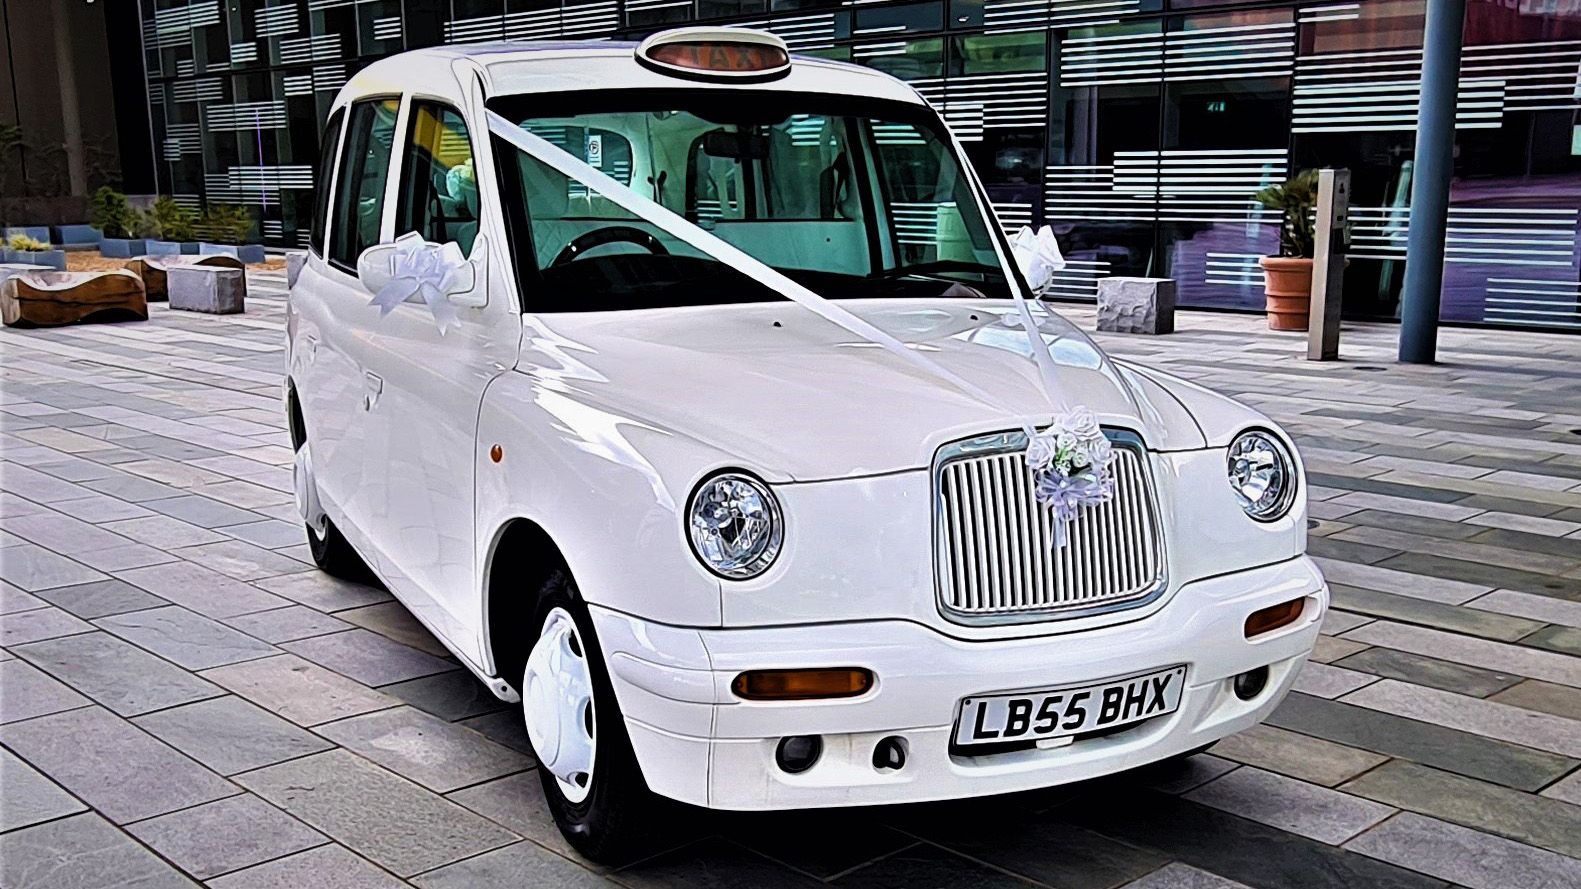 Taxi Cab wedding car for hire in London